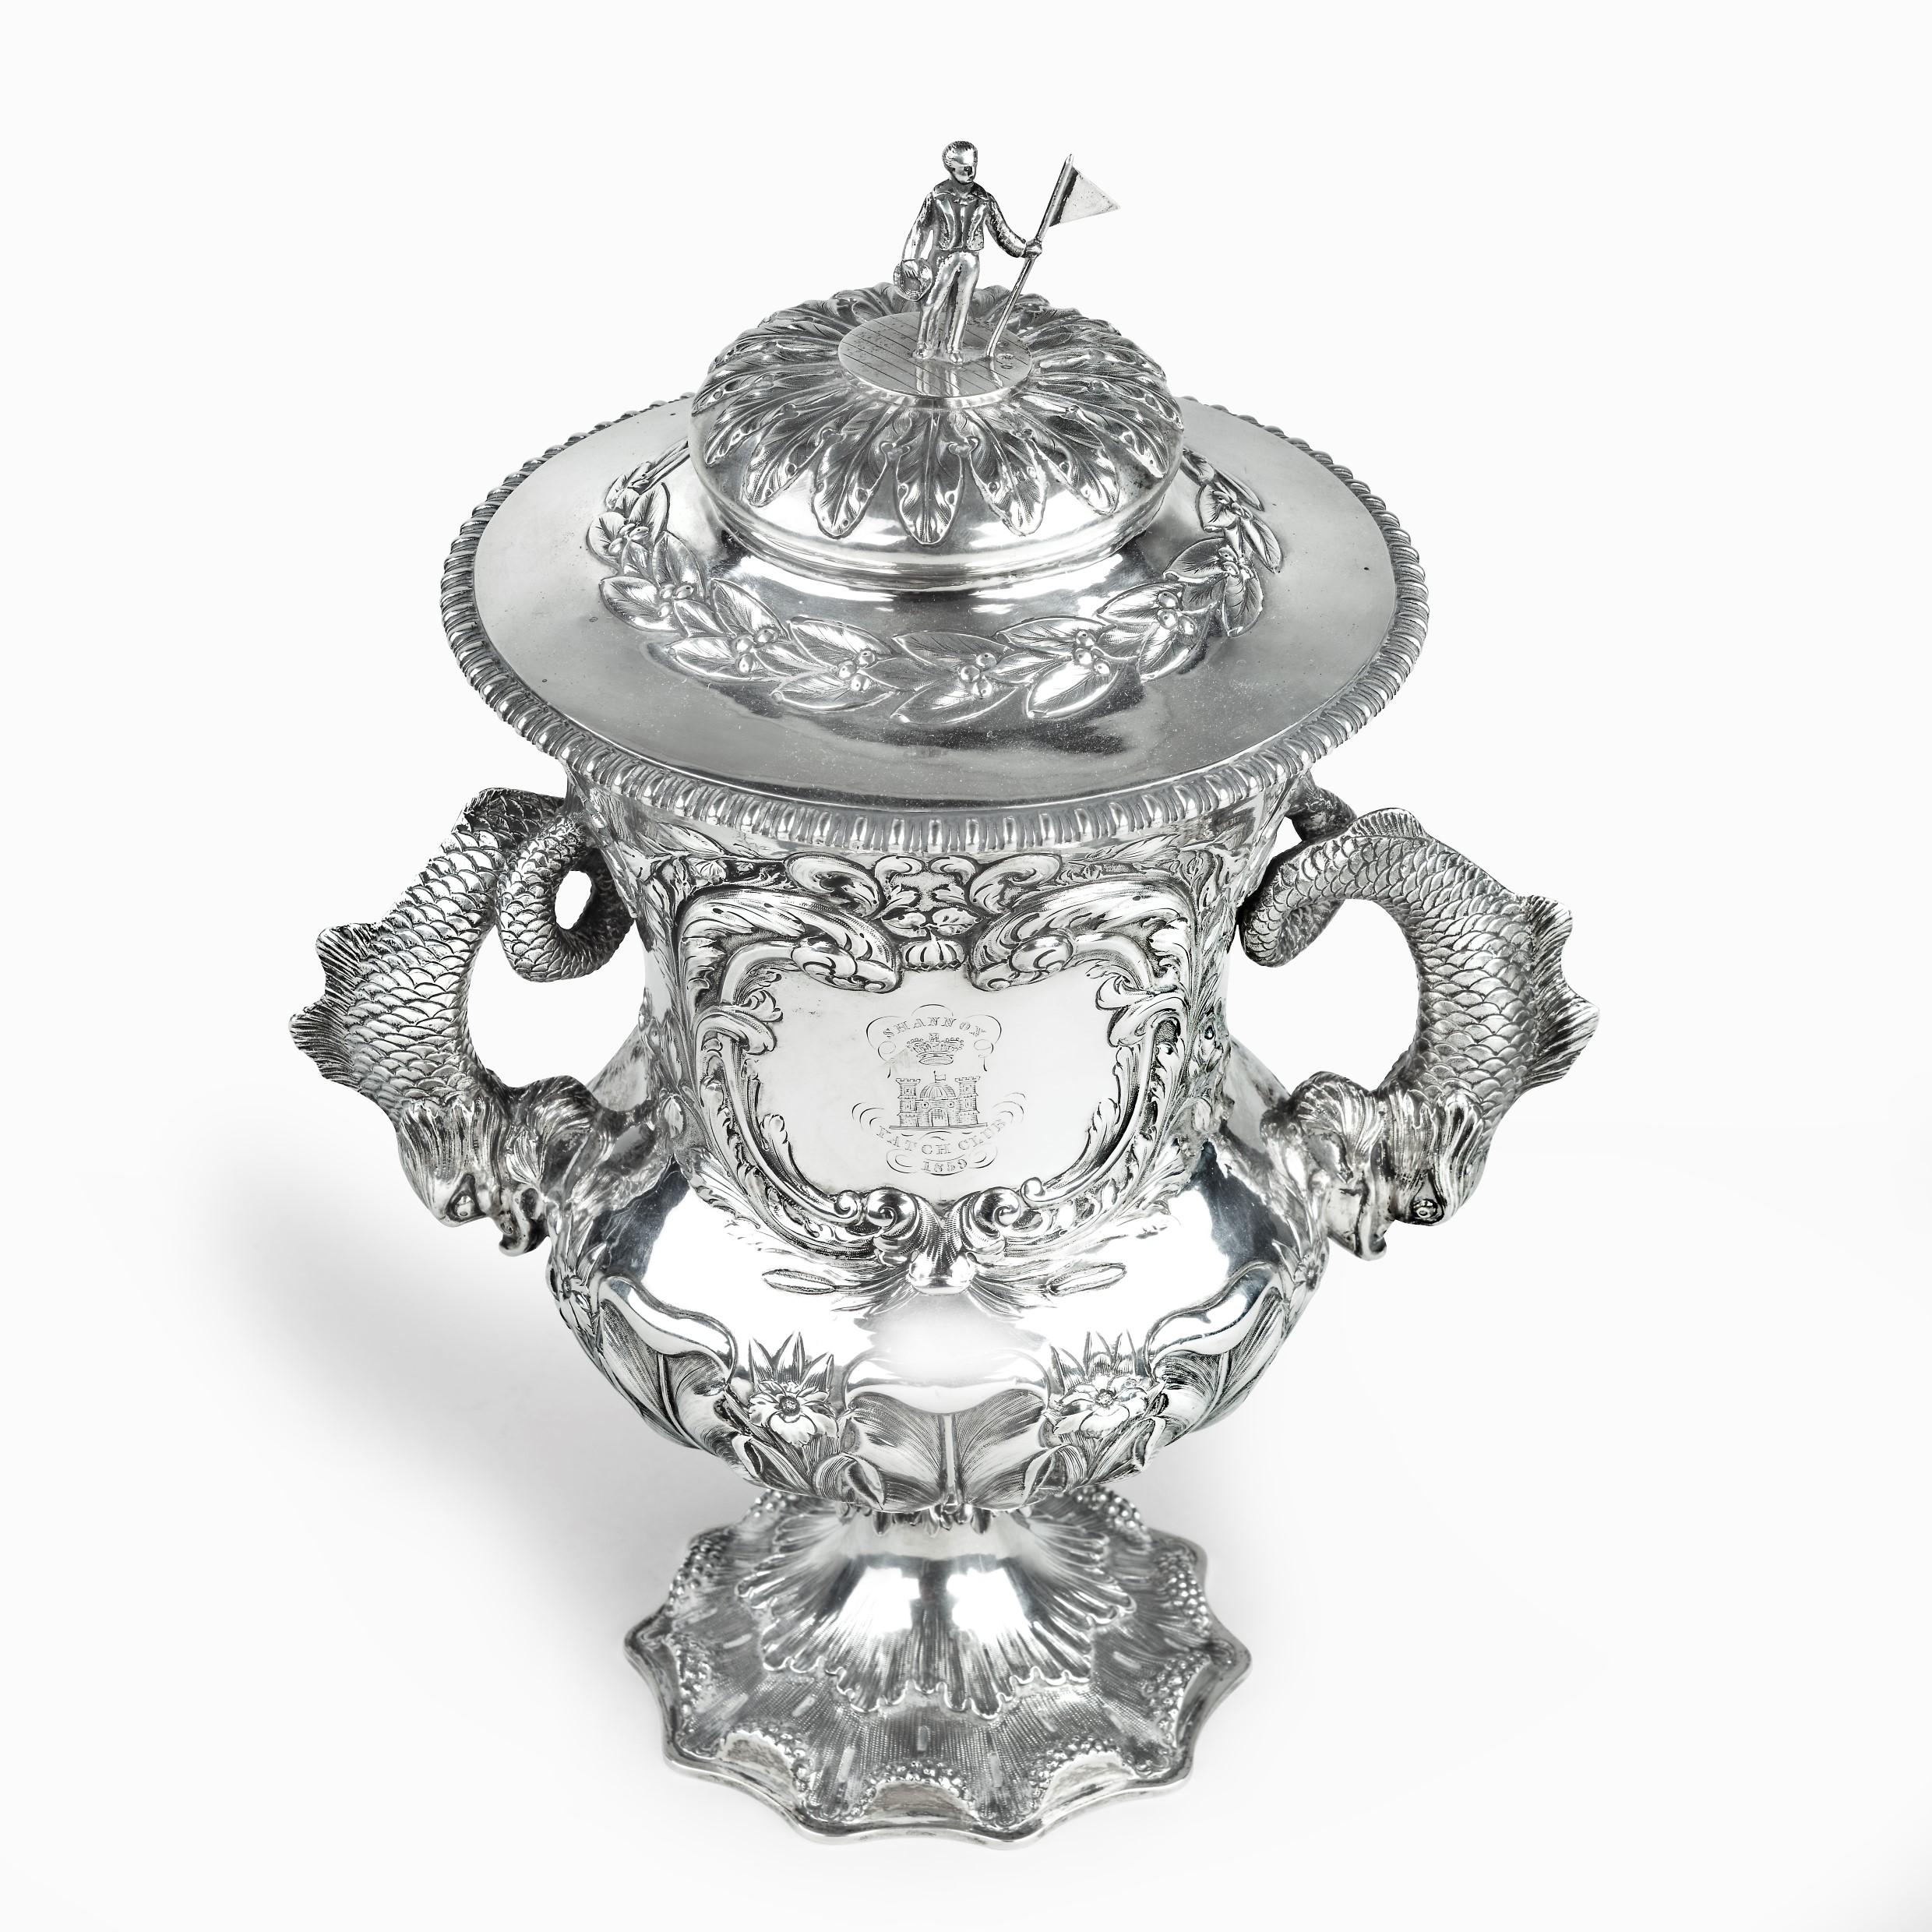 The Shannon Yacht Club silver racing trophy for 1859. This silver cup was made by John Smyth of Dublin (d 1881). It is embossed and chased with foliate, laurel and rocaille decoration surrounding the badge of the “Shannon Yatch Club” [sic] and dated